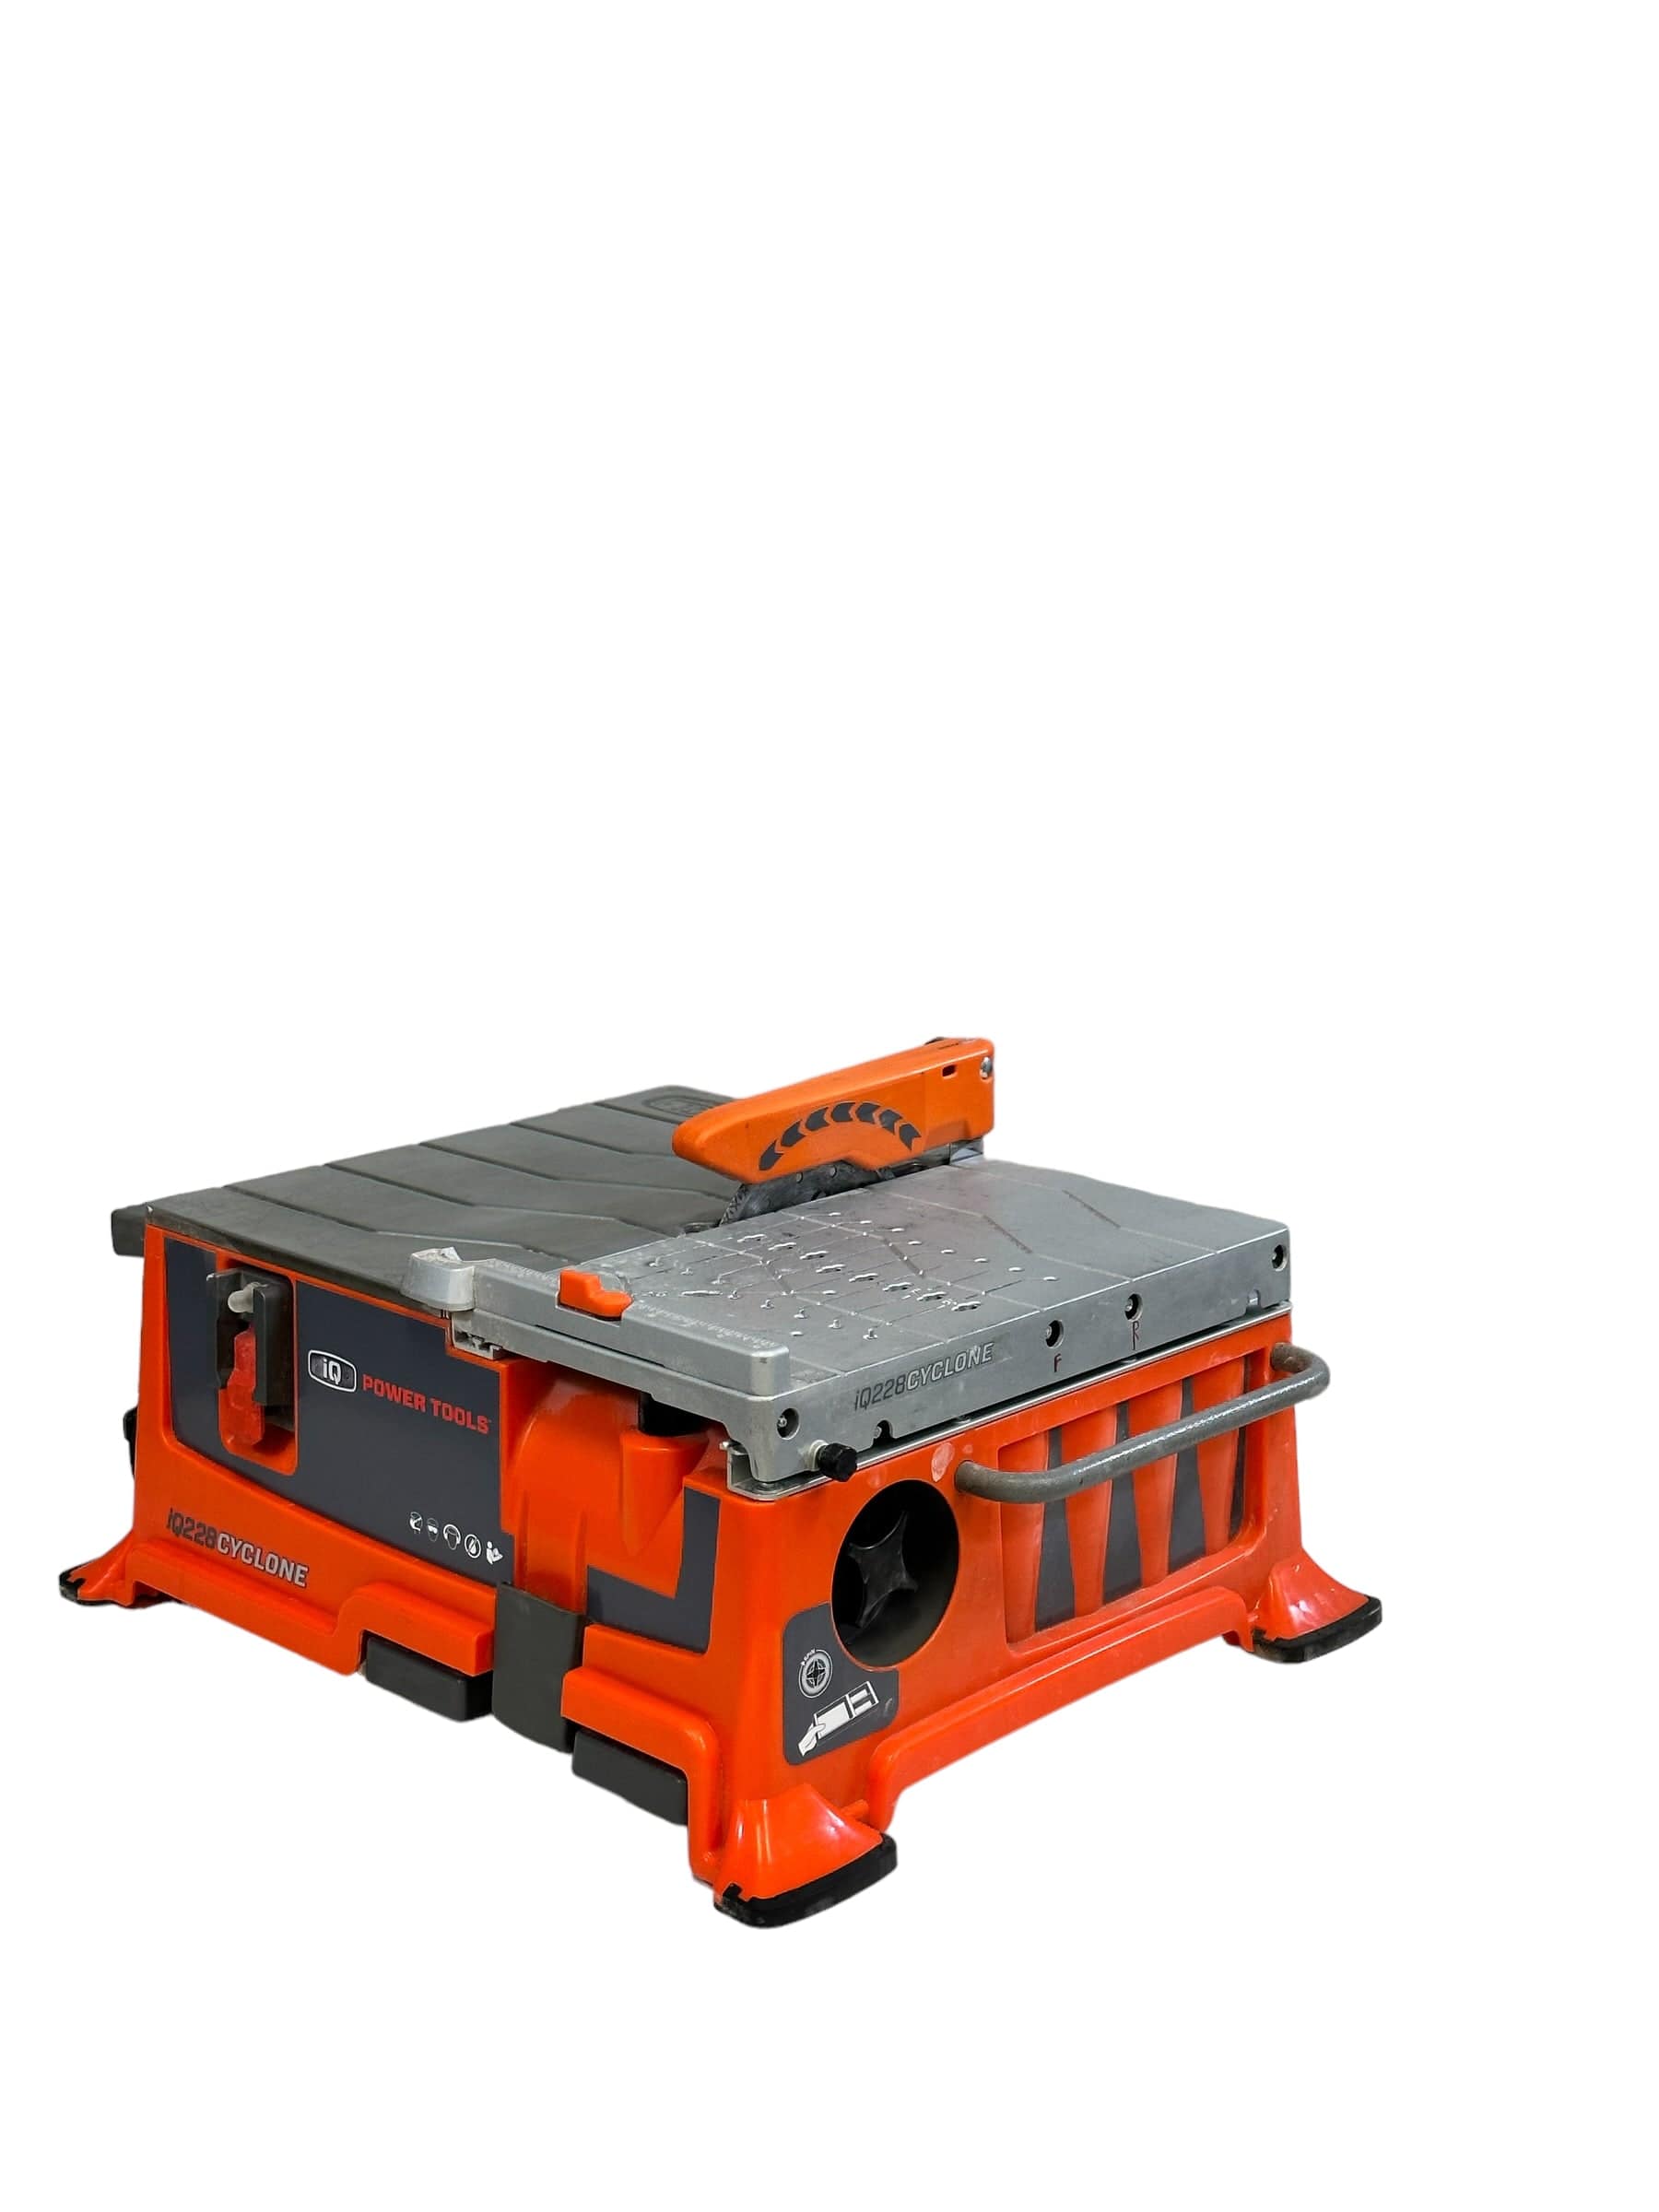 iQ228CYCLONE CE - 180 mm Dry Cut Tabletop Tile Saw